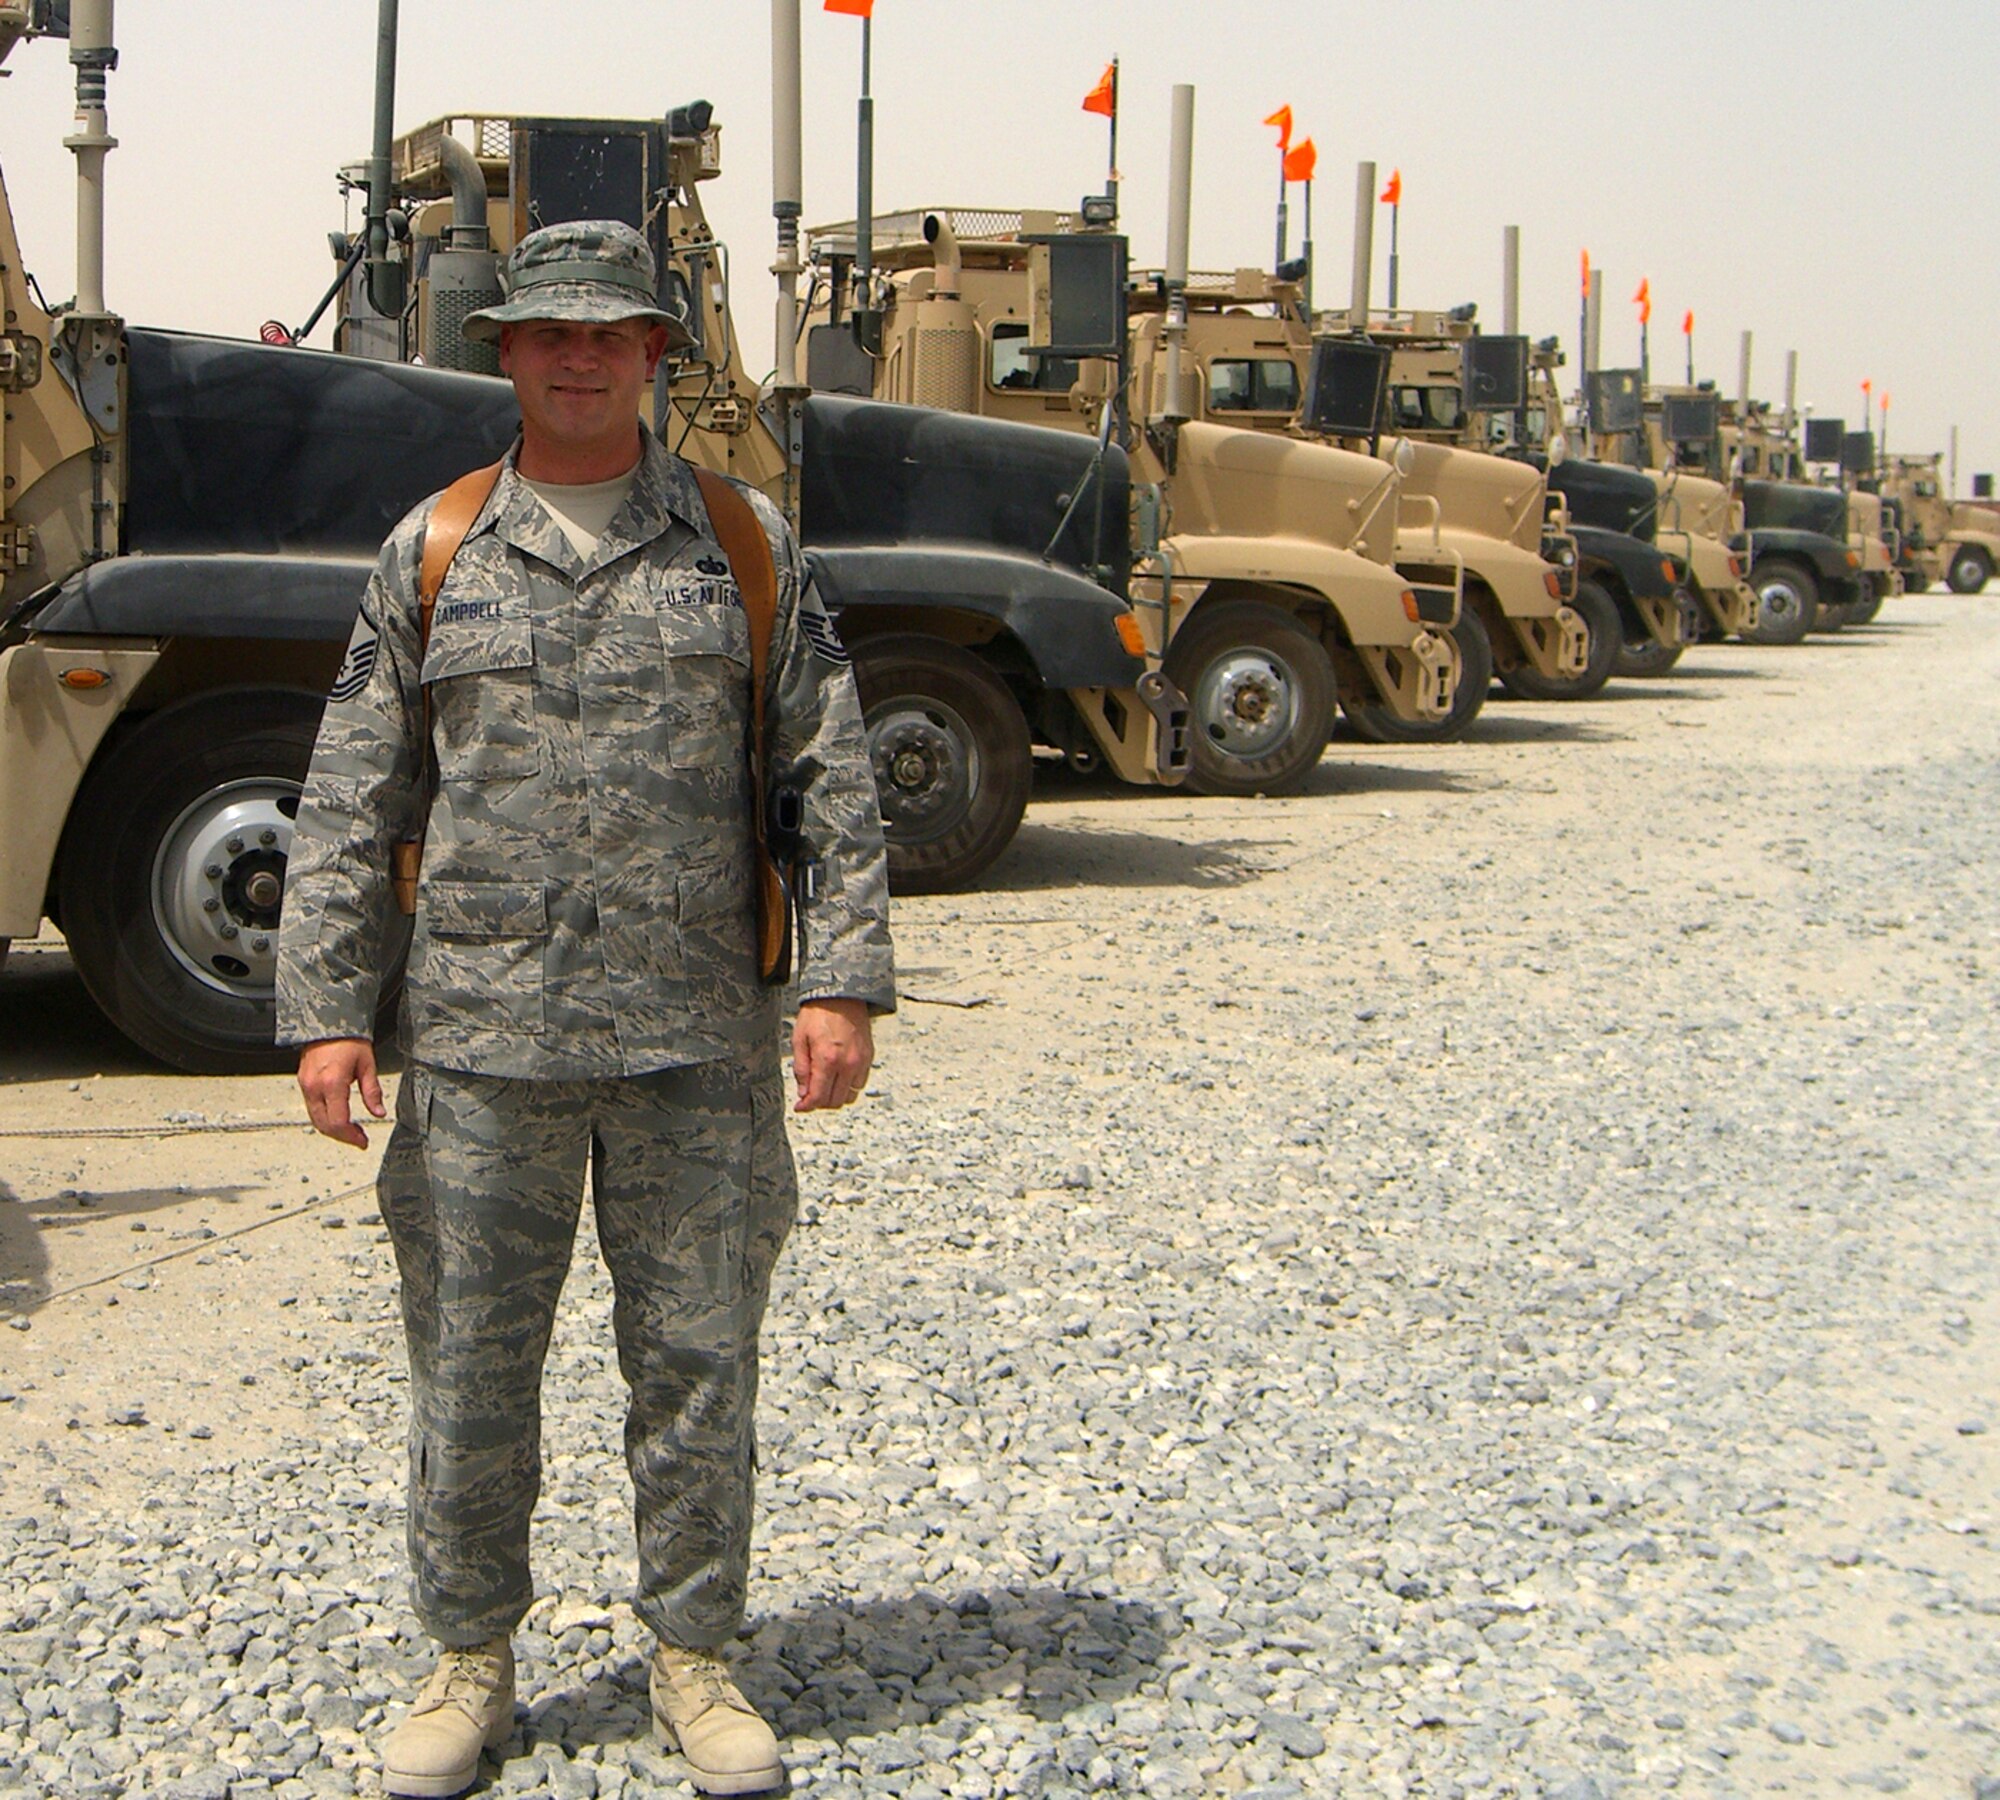 SOUTHWEST ASIA -- Master Sgt. Steve Campbell (U.S. Air Force courtesy photo)
